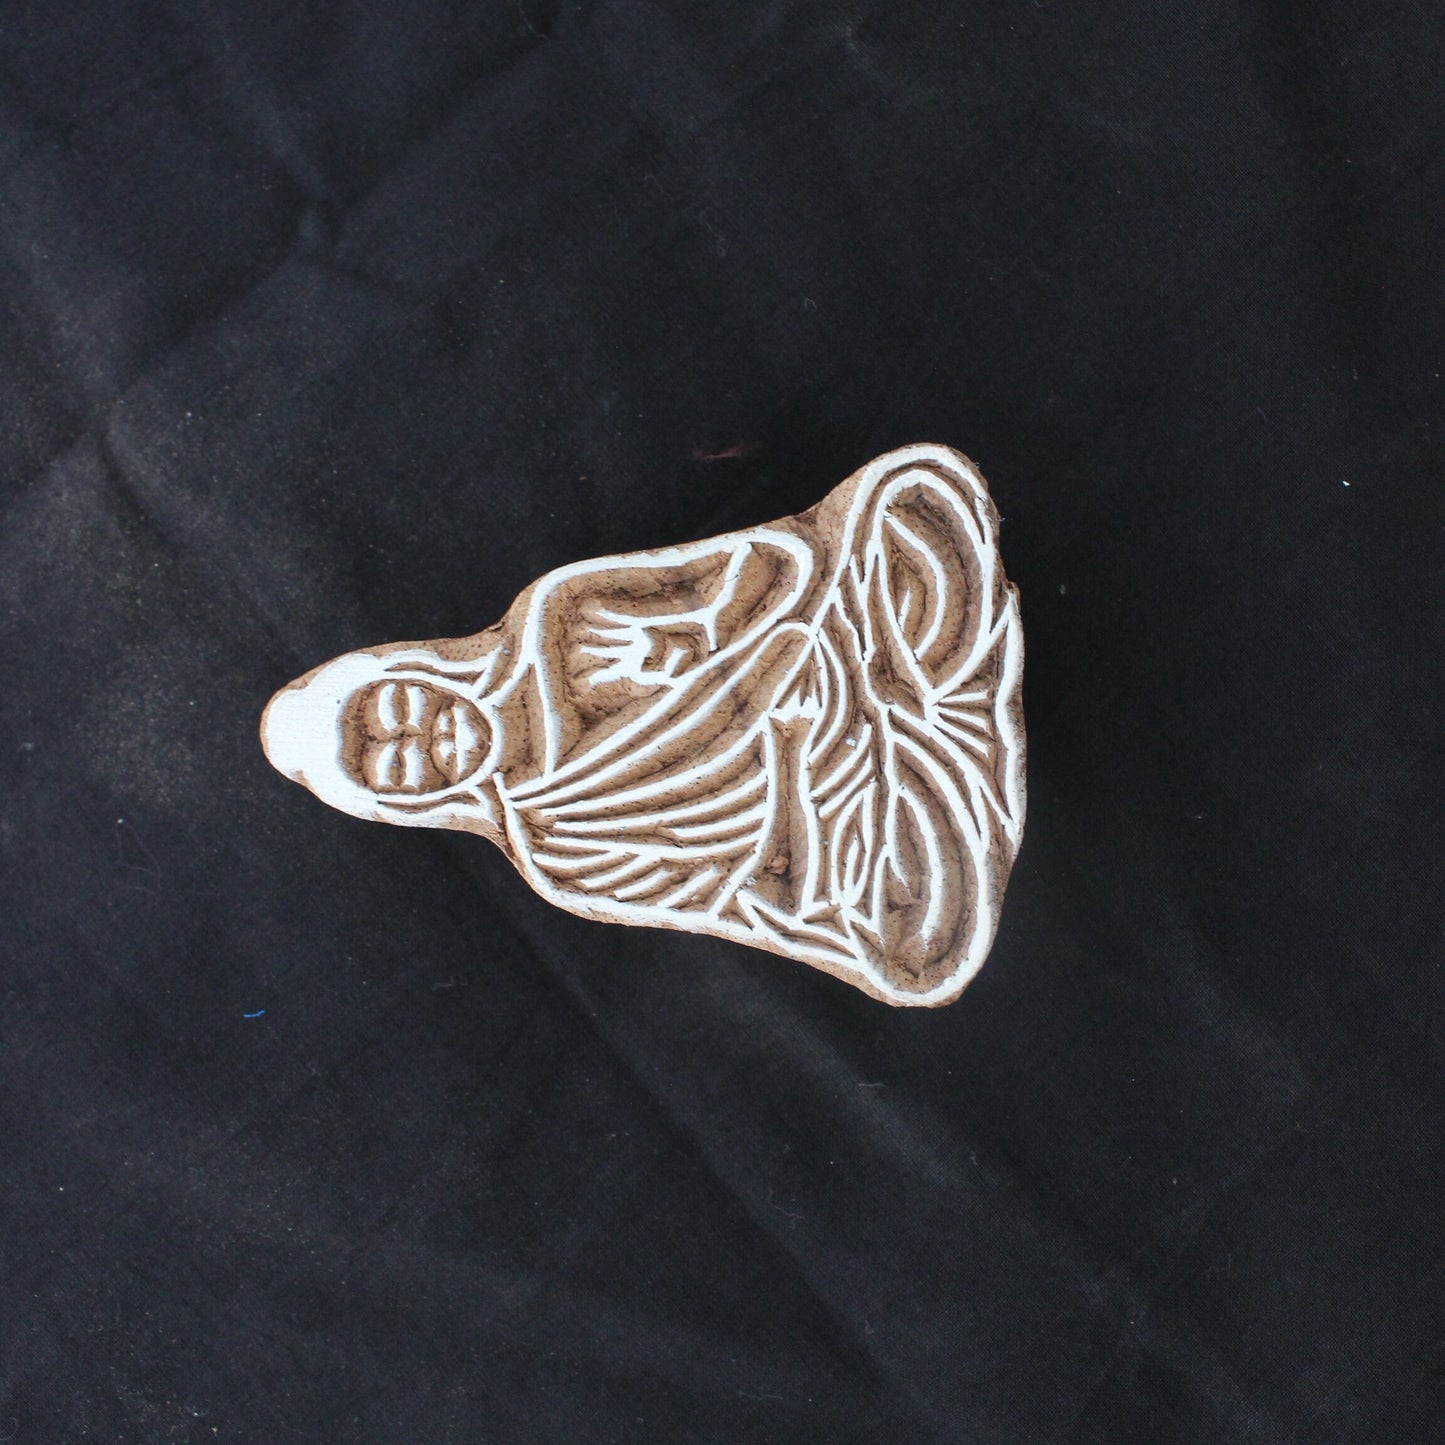 Buddha Fabric Stamp Hand Carved Fabric Stamp Meditation Fabric Stamp Carve Textile Printing Block For Printing Spiritual Soap Making Stamp